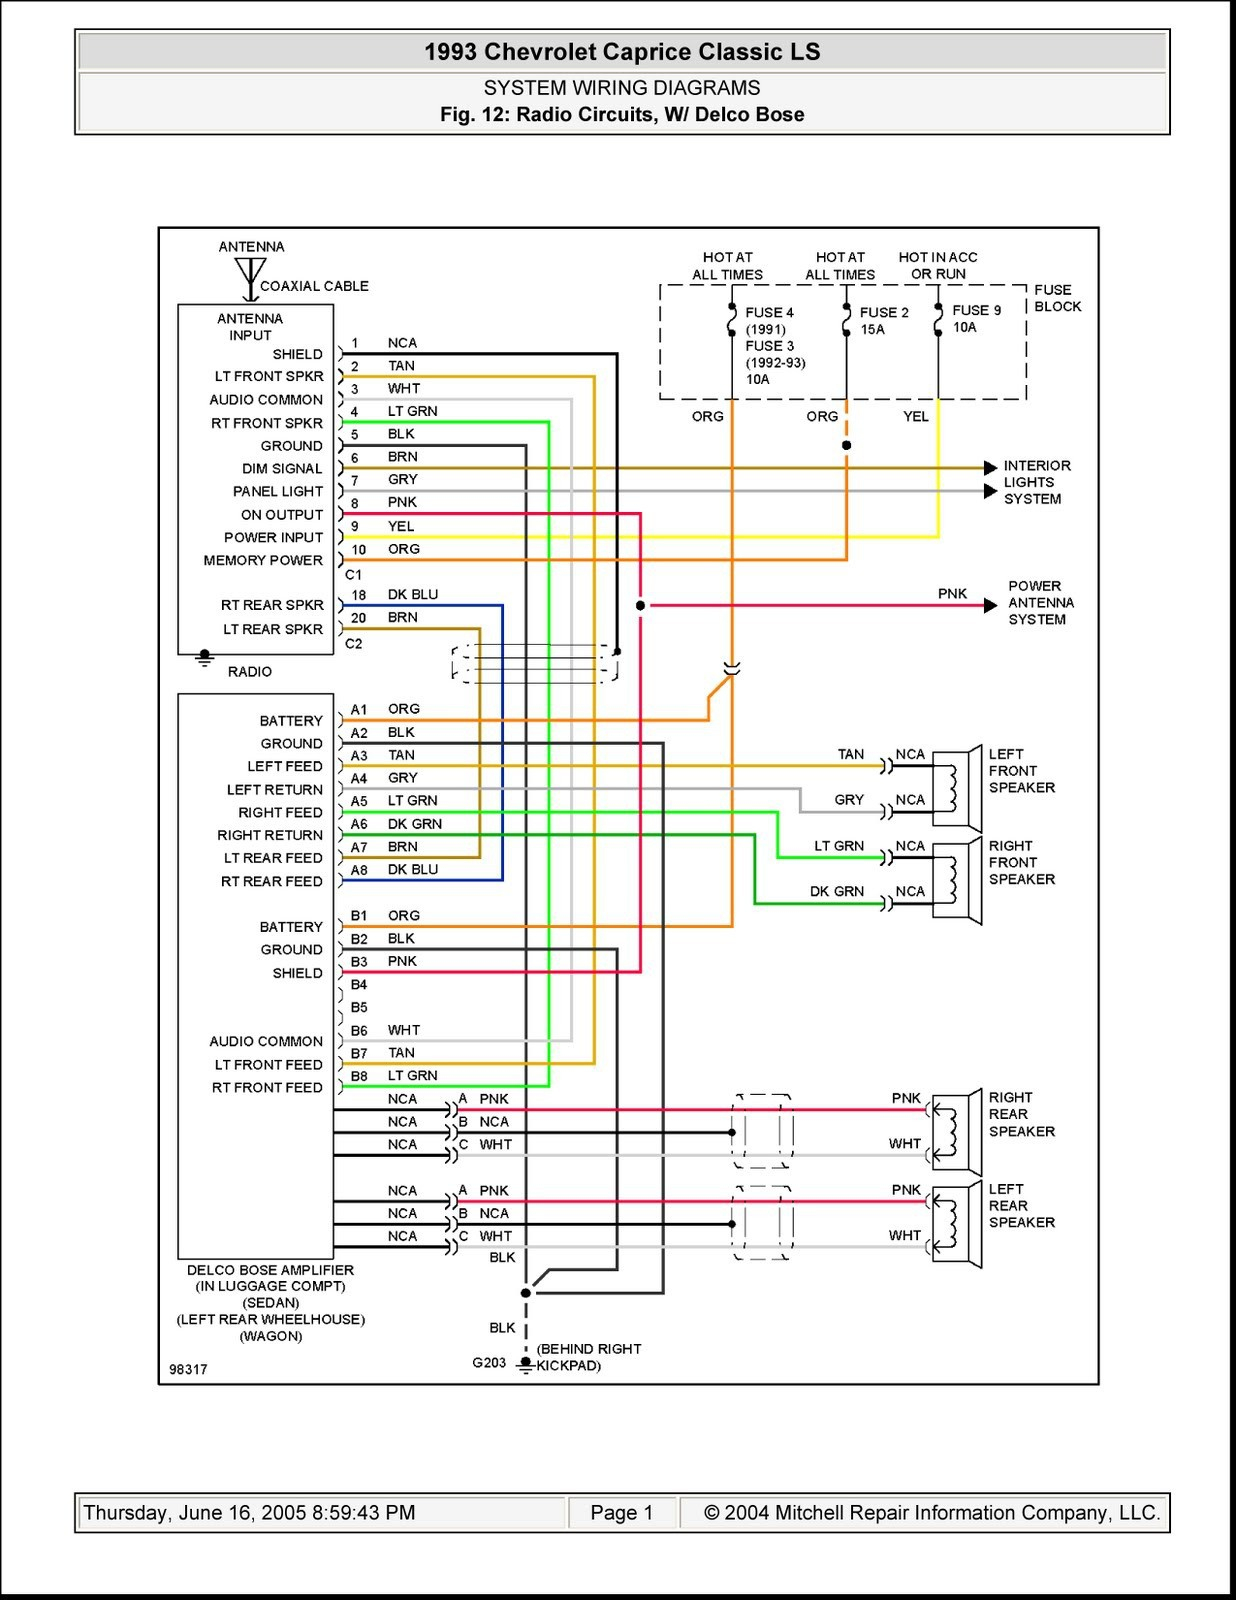 2000 Chevy Tahoe Stereo Wiring Diagram | Wiring Diagram - 2002 Chevy Tahoe Radio Wiring Diagram